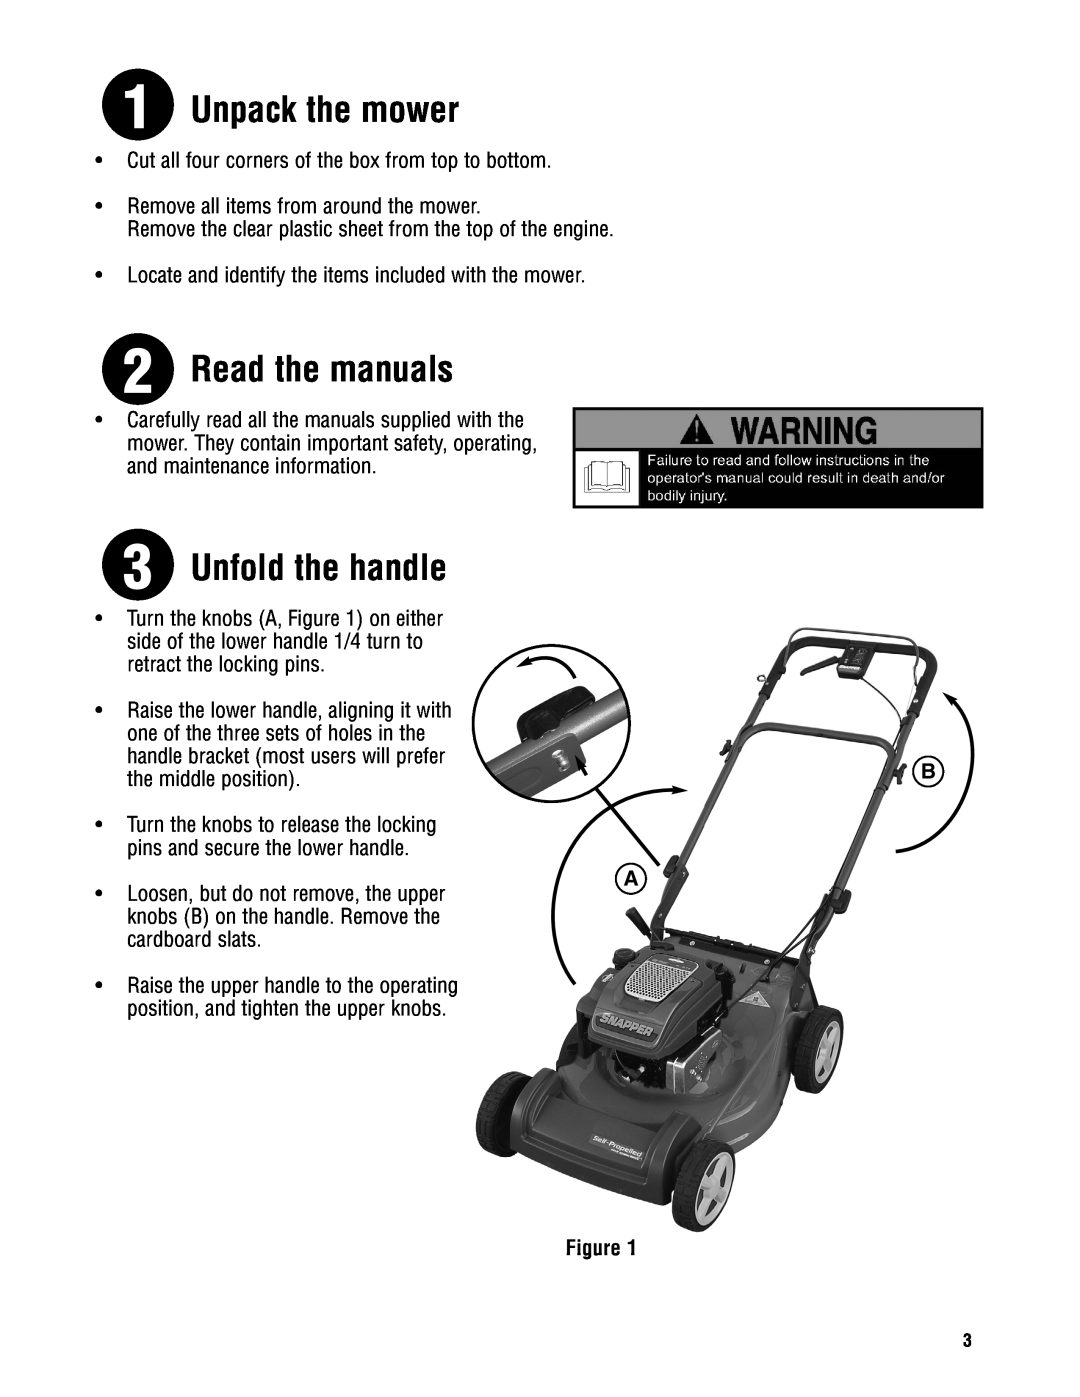 Snapper ESPV21675 Unpack the mower, Read the manuals, Unfold the handle 